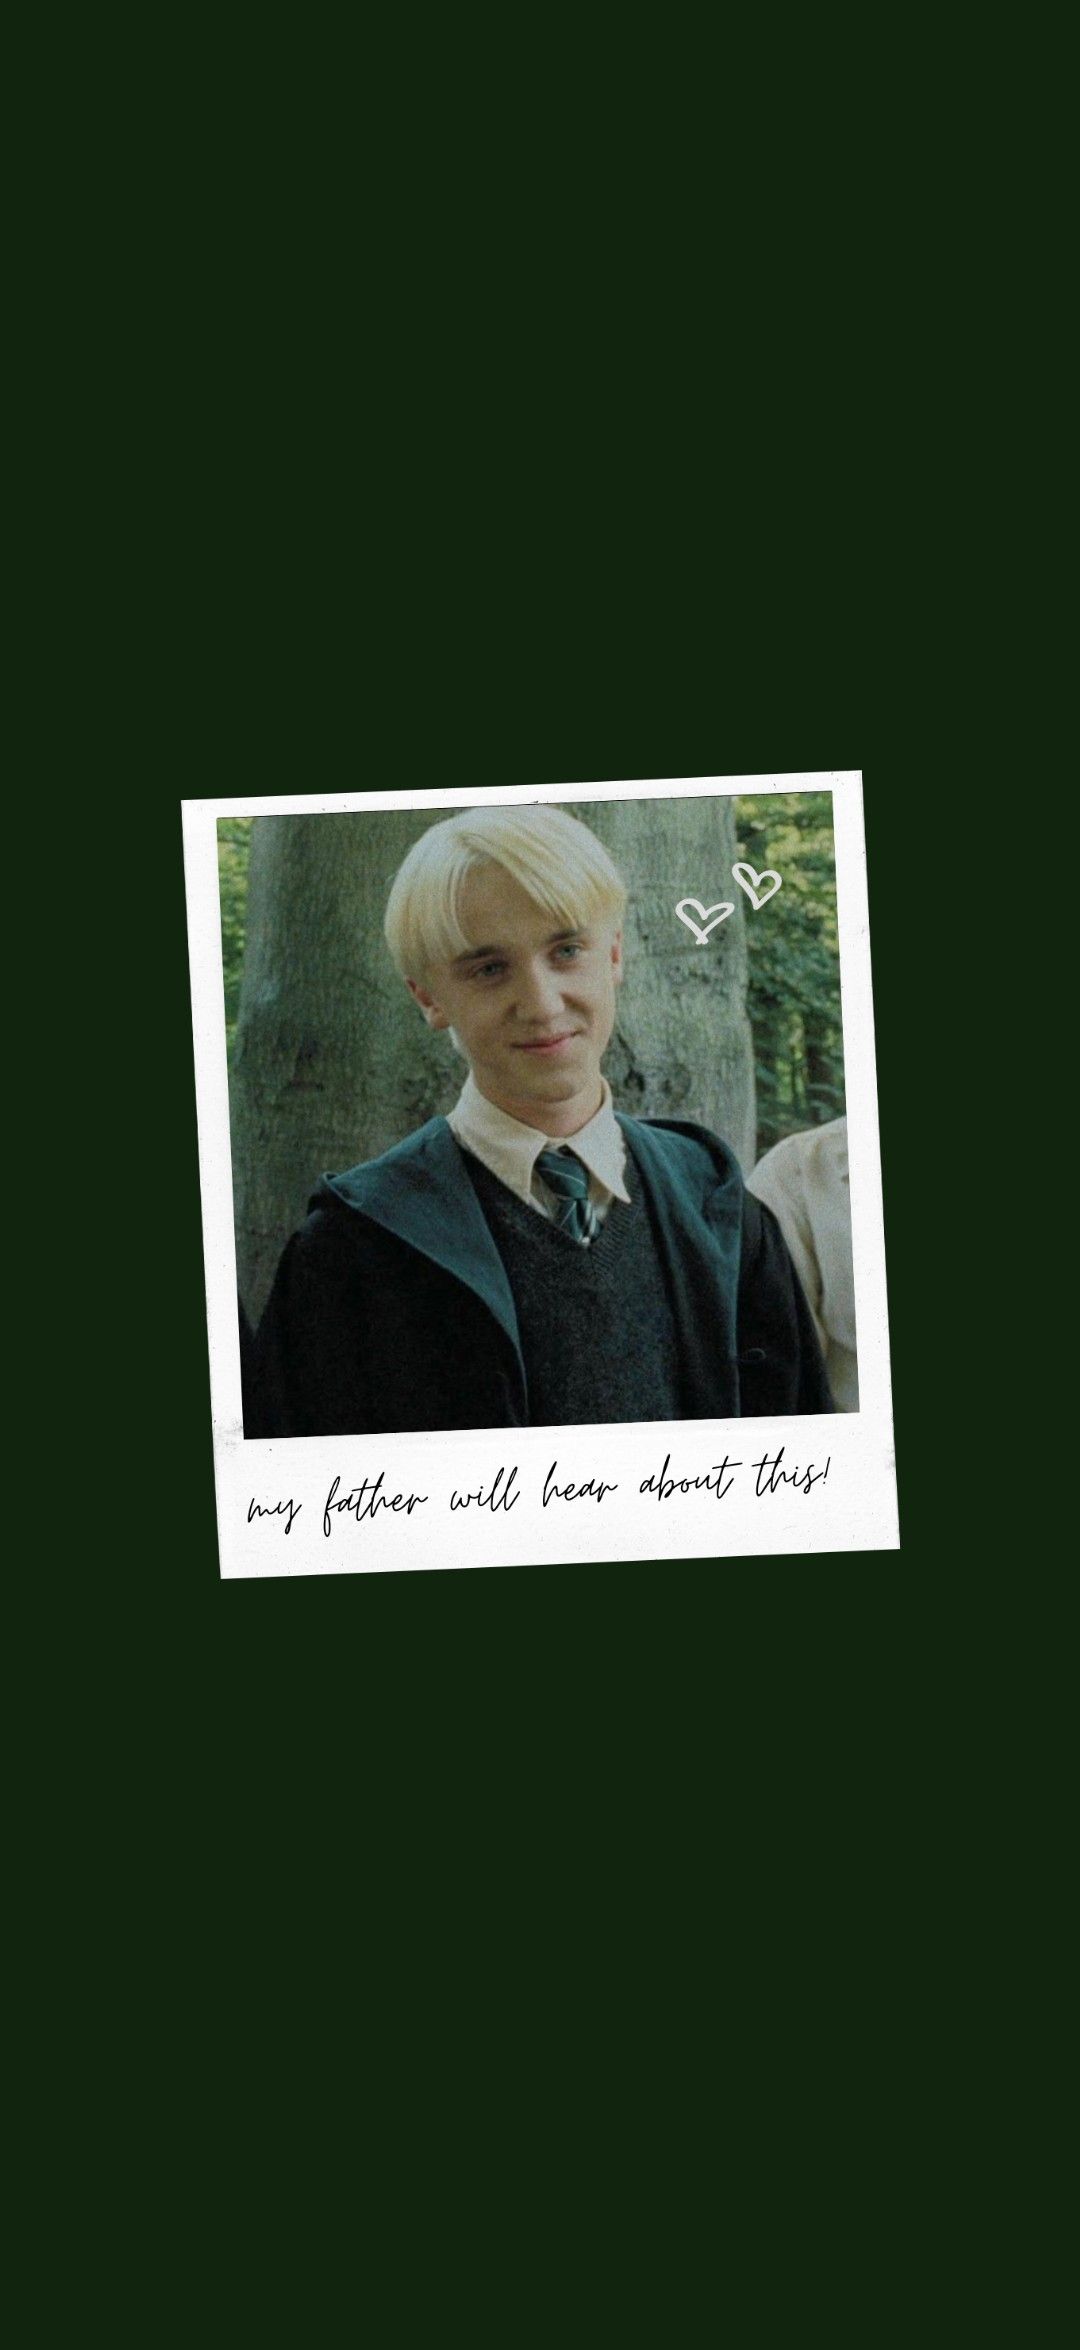 Download Draco Malfoy Wallpapers for FREE [100,000+ Mobile